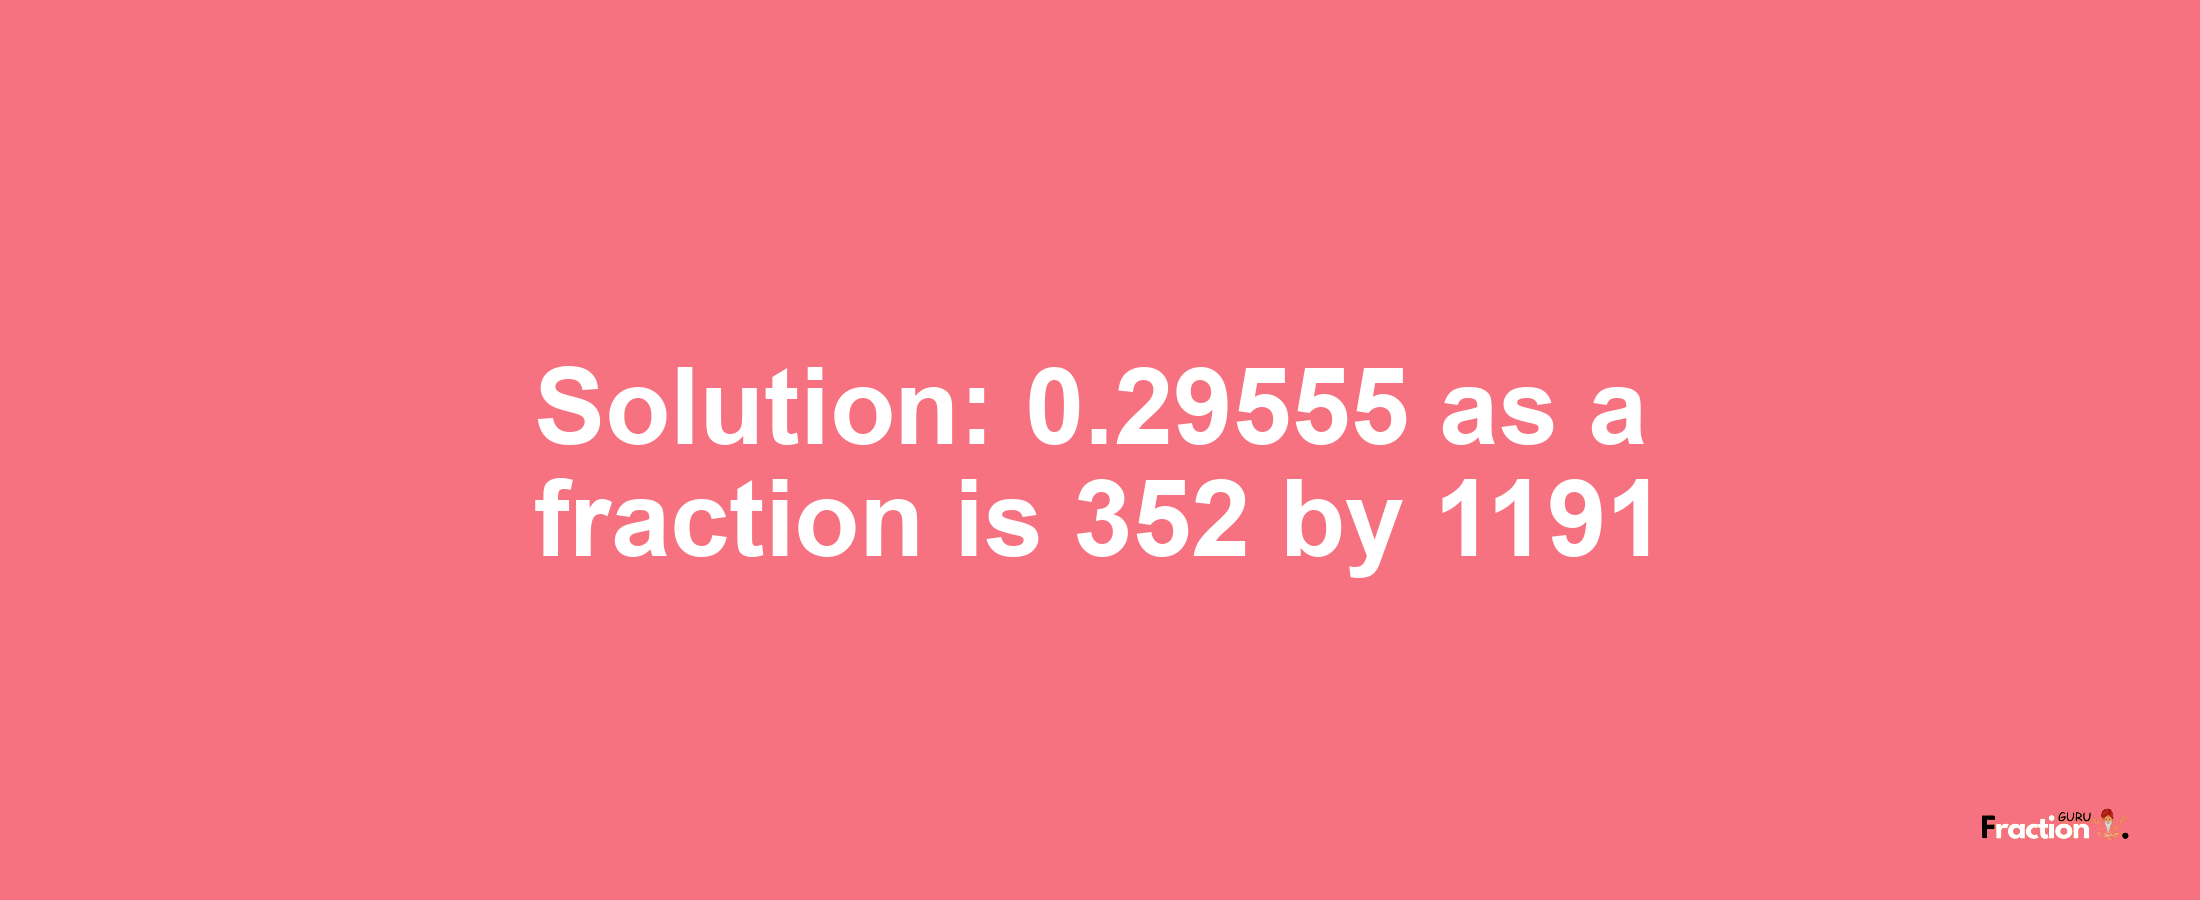 Solution:0.29555 as a fraction is 352/1191